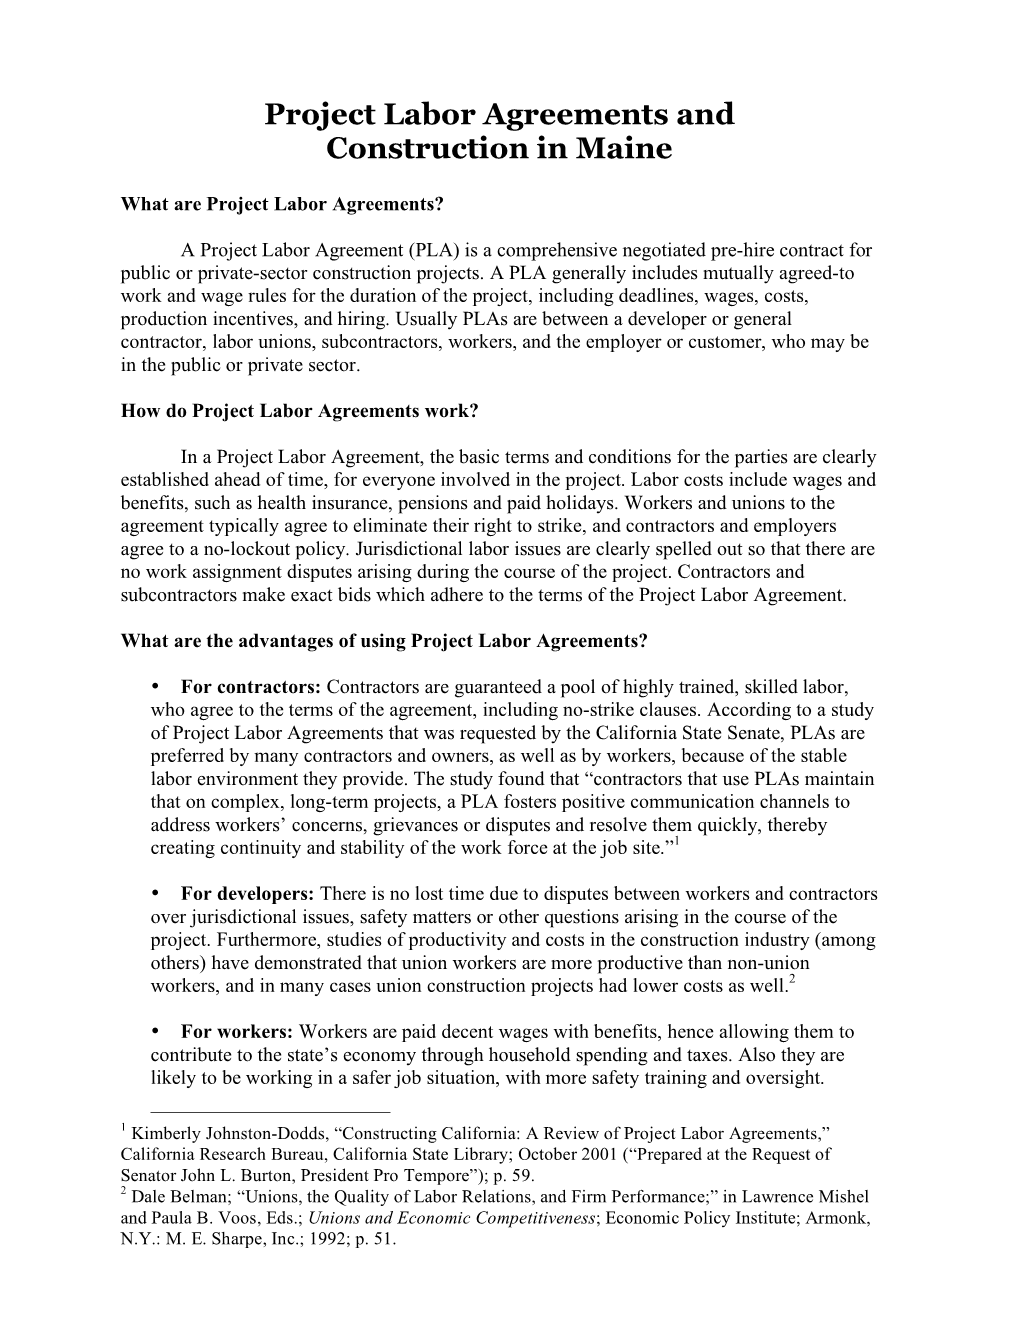 Project Labor Agreements and Construction in Maine (PDF)